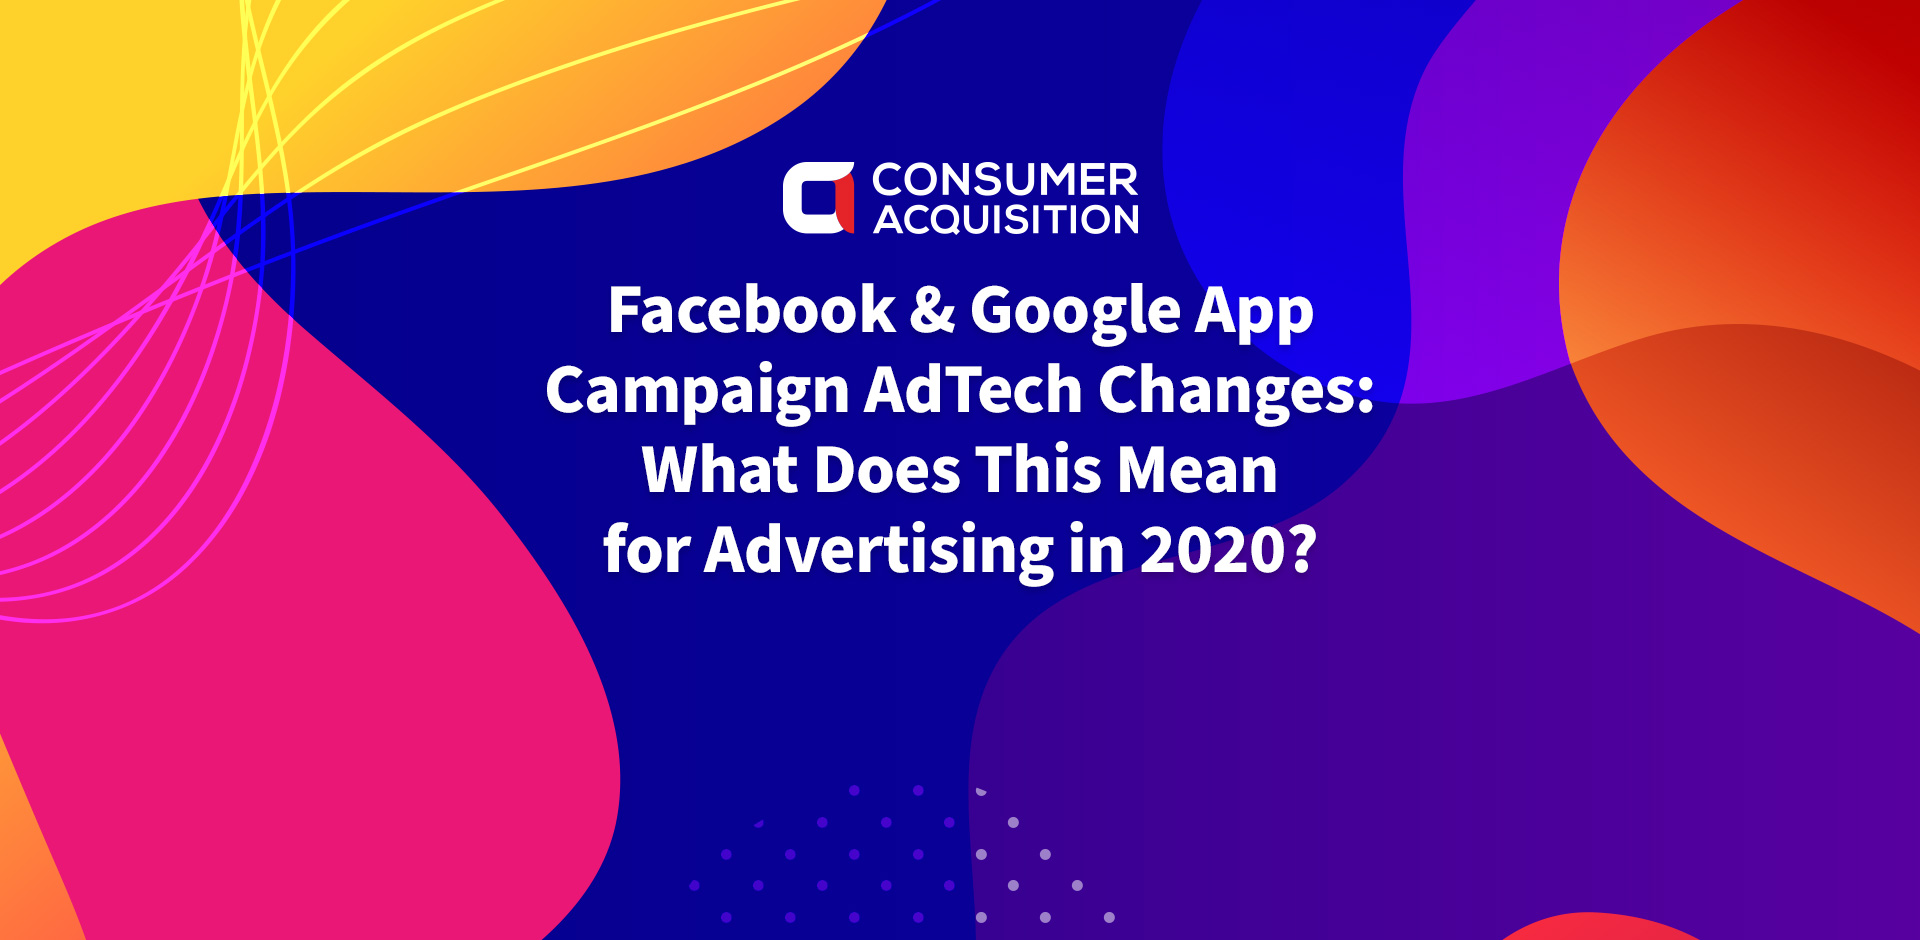 Facebook & Google App Campaign AdTech Changes: What Does This Mean for Advertising in 2020?